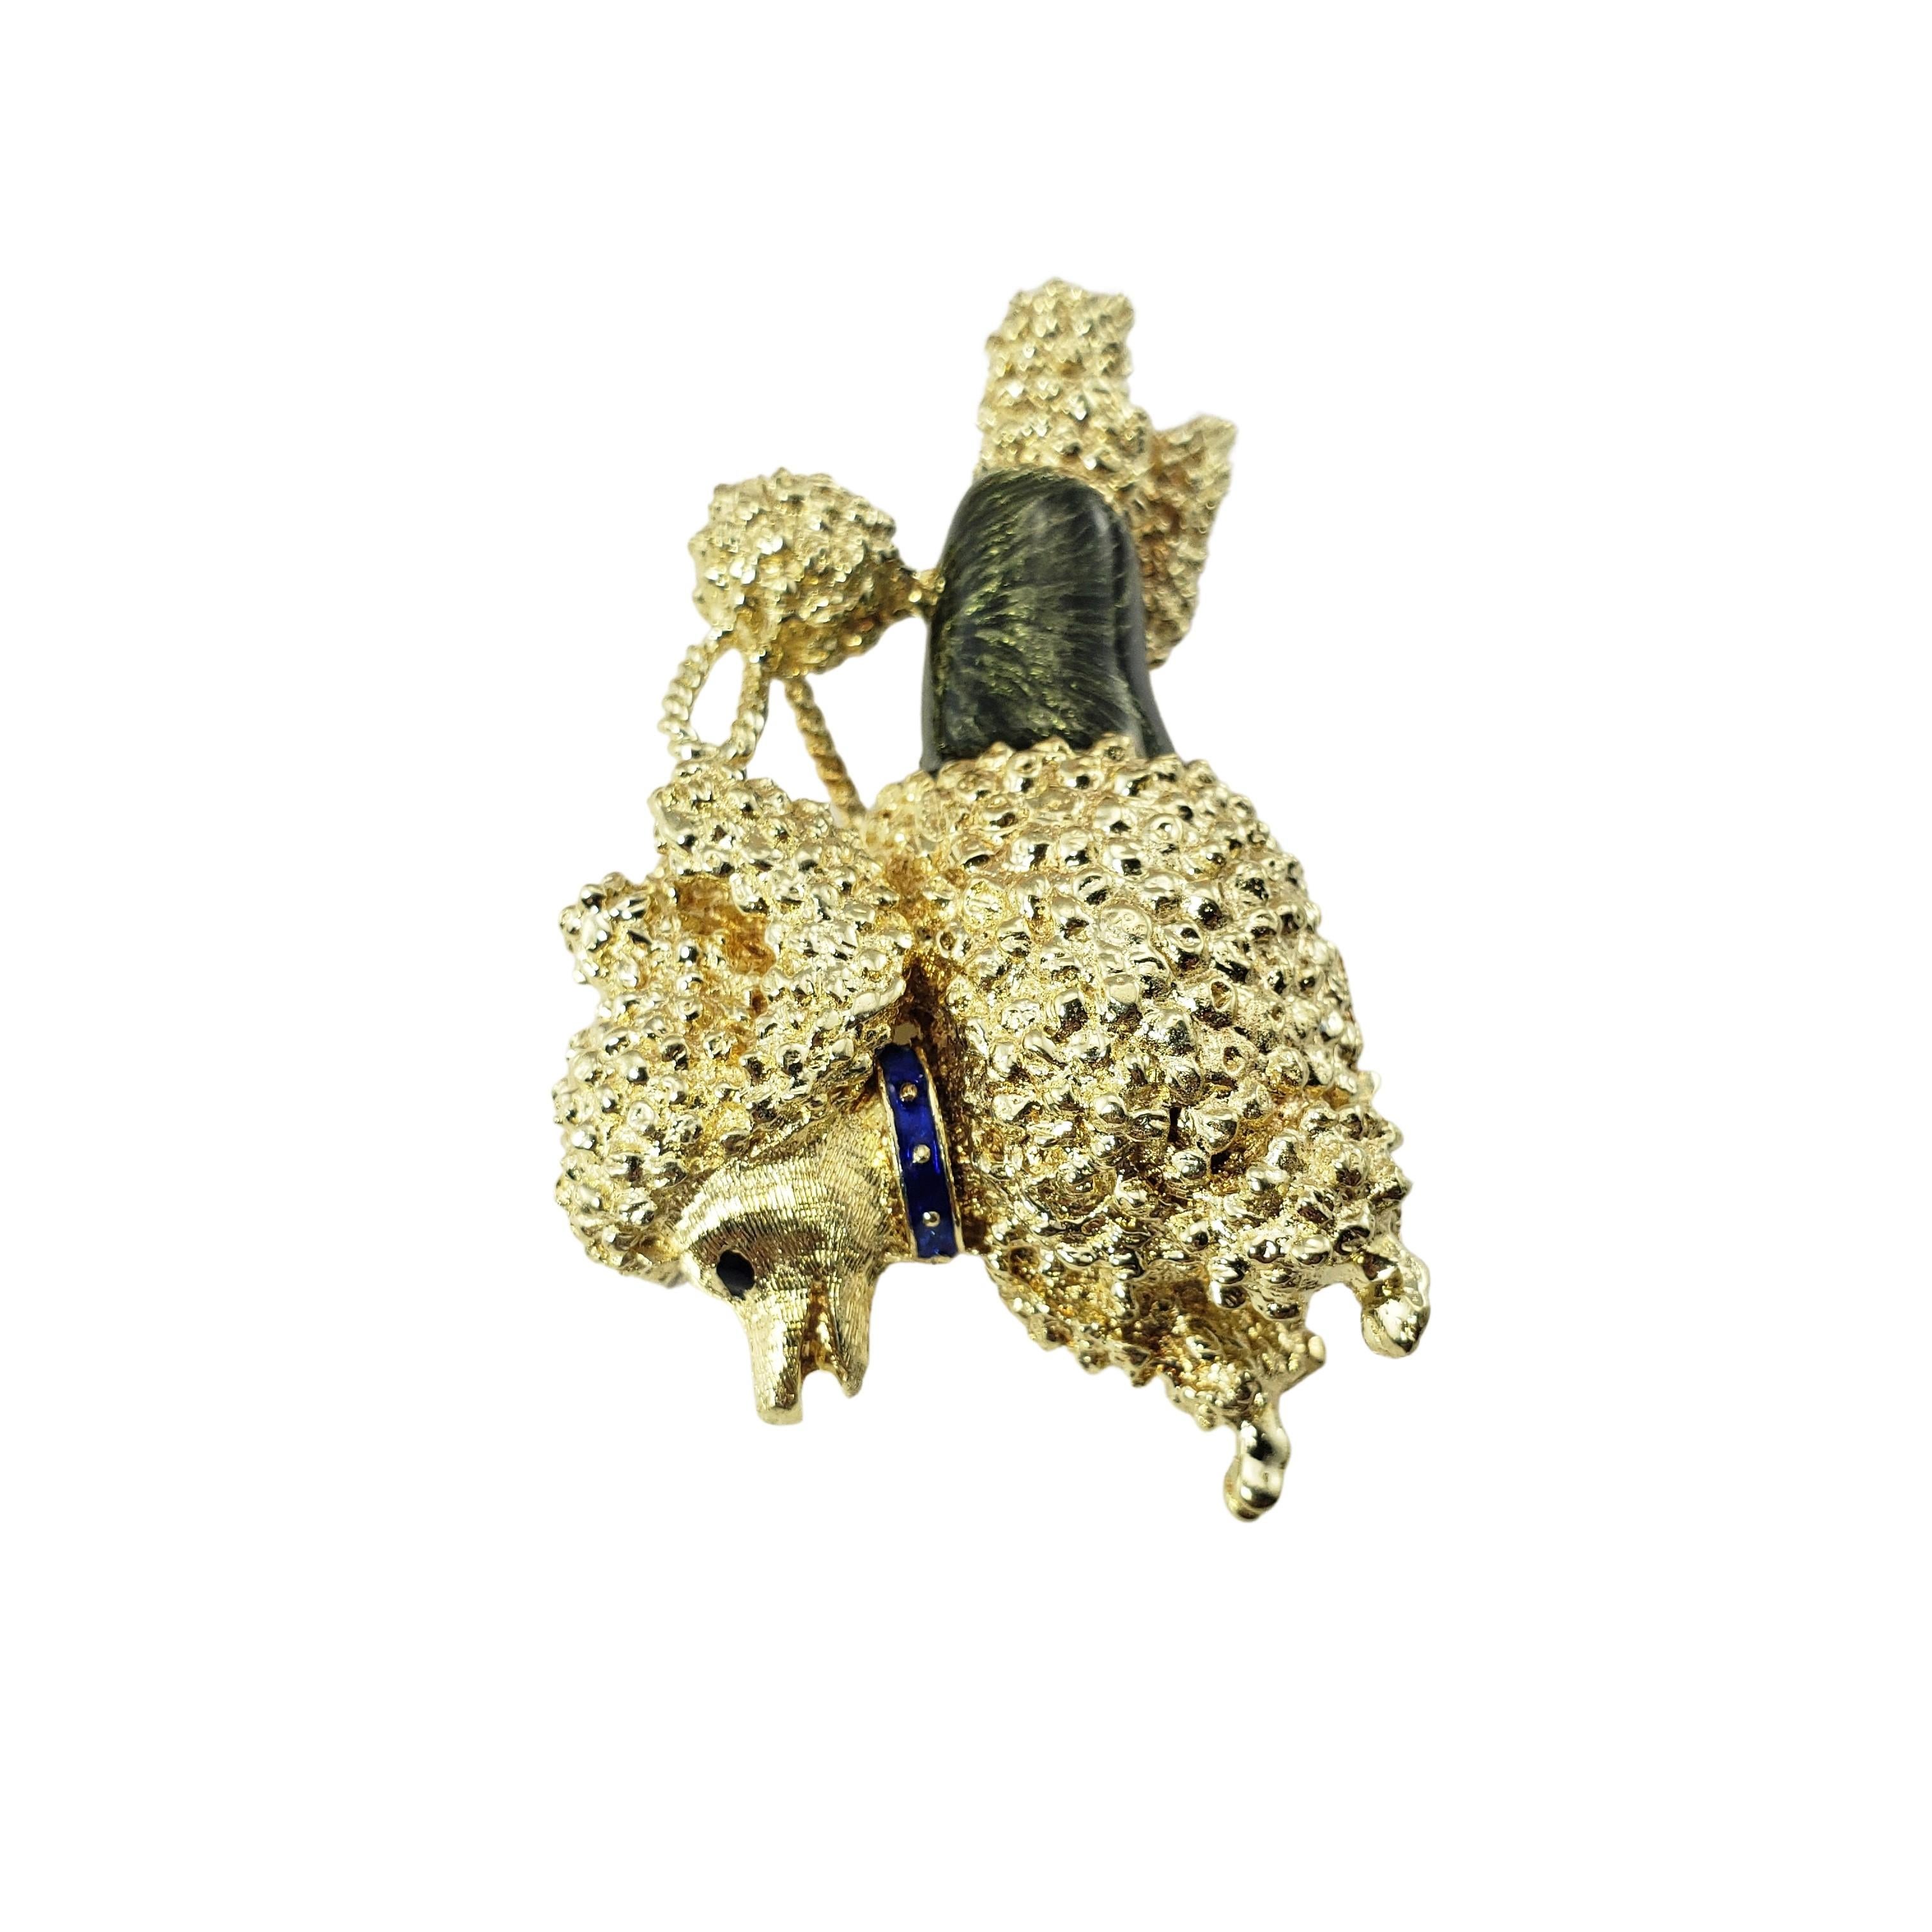 Vintage 14 Karat Yellow Gold and Enamel Poodle Brooch/Bin-

This lovely 14K yellow gold brooch features a beautifully crafted poodle accented with colorful blue and green enamel.

Size: 44 mm x 30 mm

Weight:  12.8 dwt. /  20.0 gr.

Stamped: